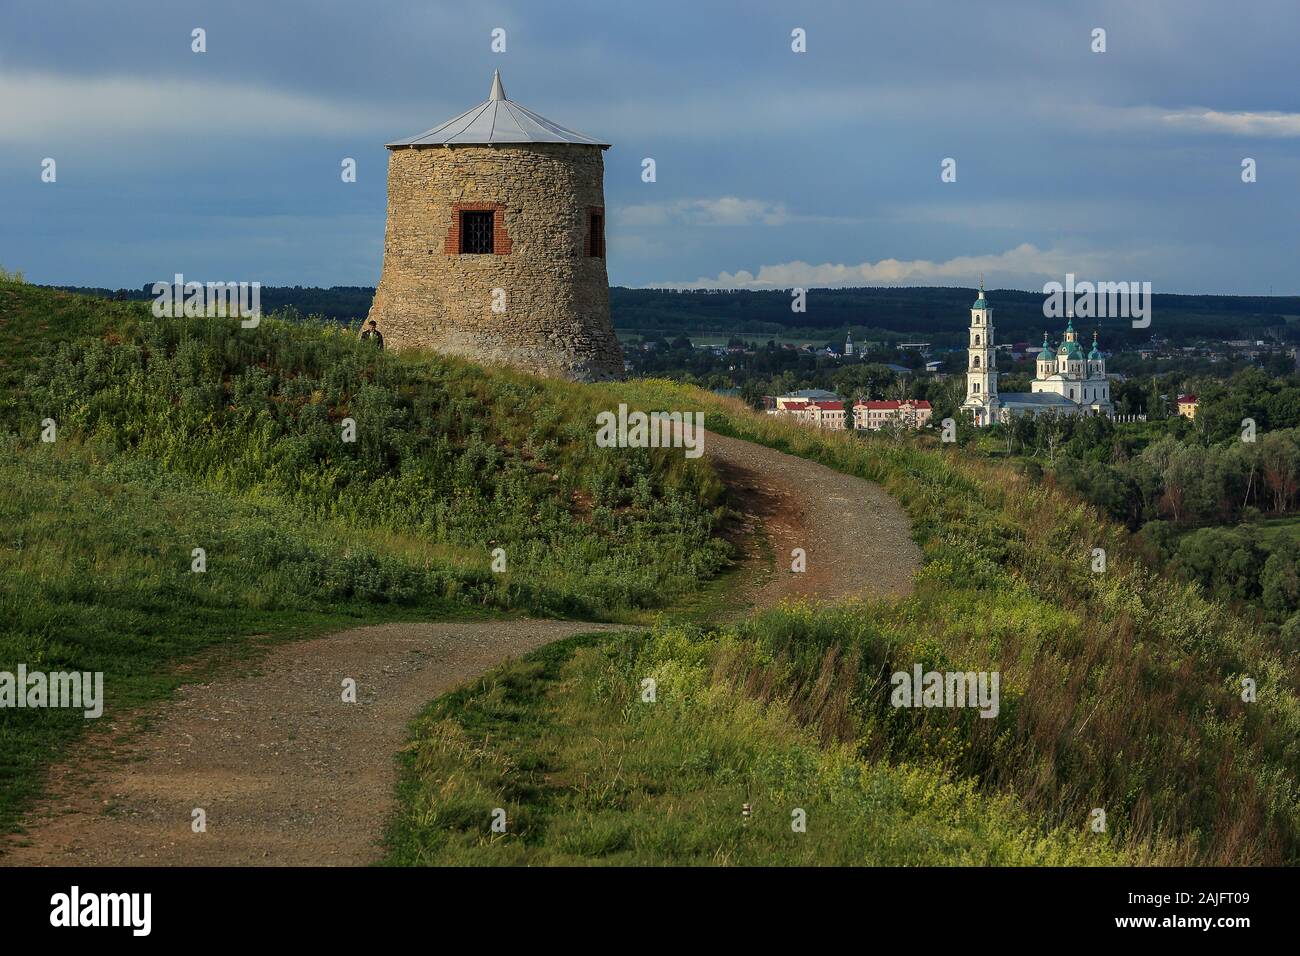 Tower of ancient Bulgar fortress on a high cliff on the banks of the Kama River. Elabuga, Republic of Tatarstan, Russia Stock Photo